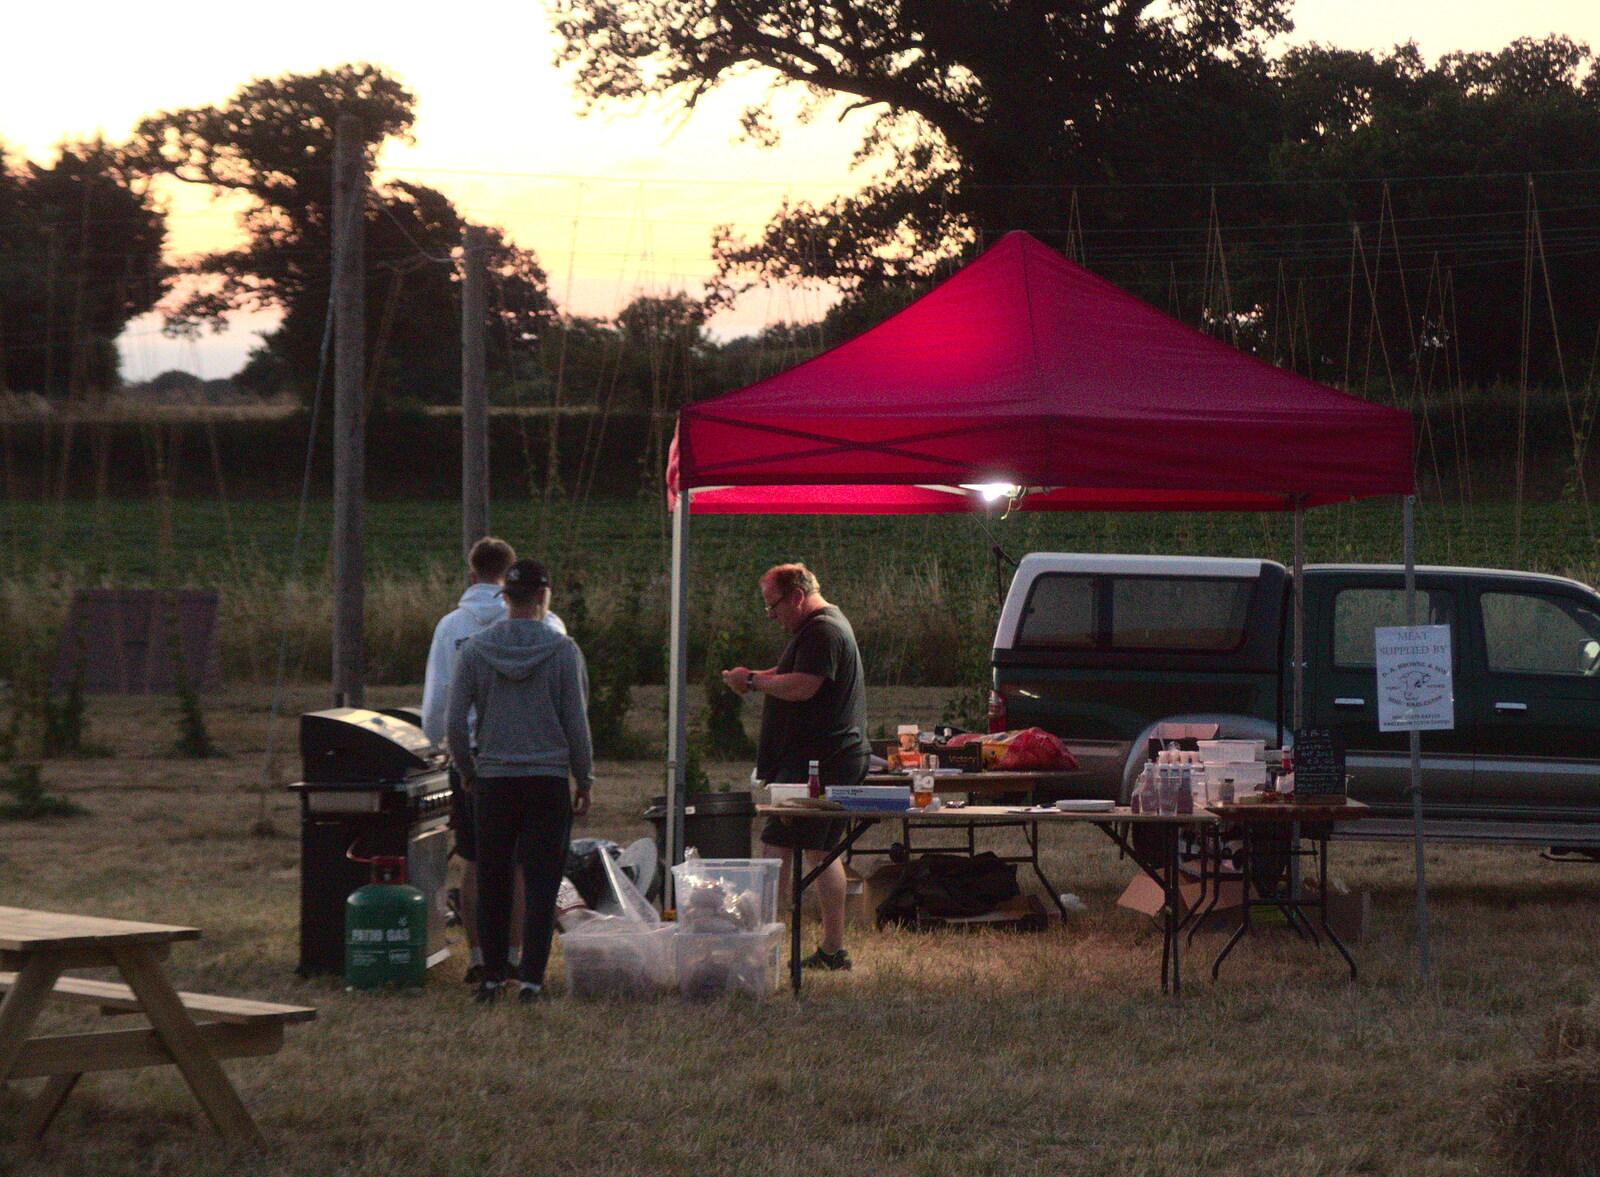 The BSCC Rides to Star Wing Beer Festival, Redgrave, Suffolk - 12th July 2018: The barbeque is packing up 